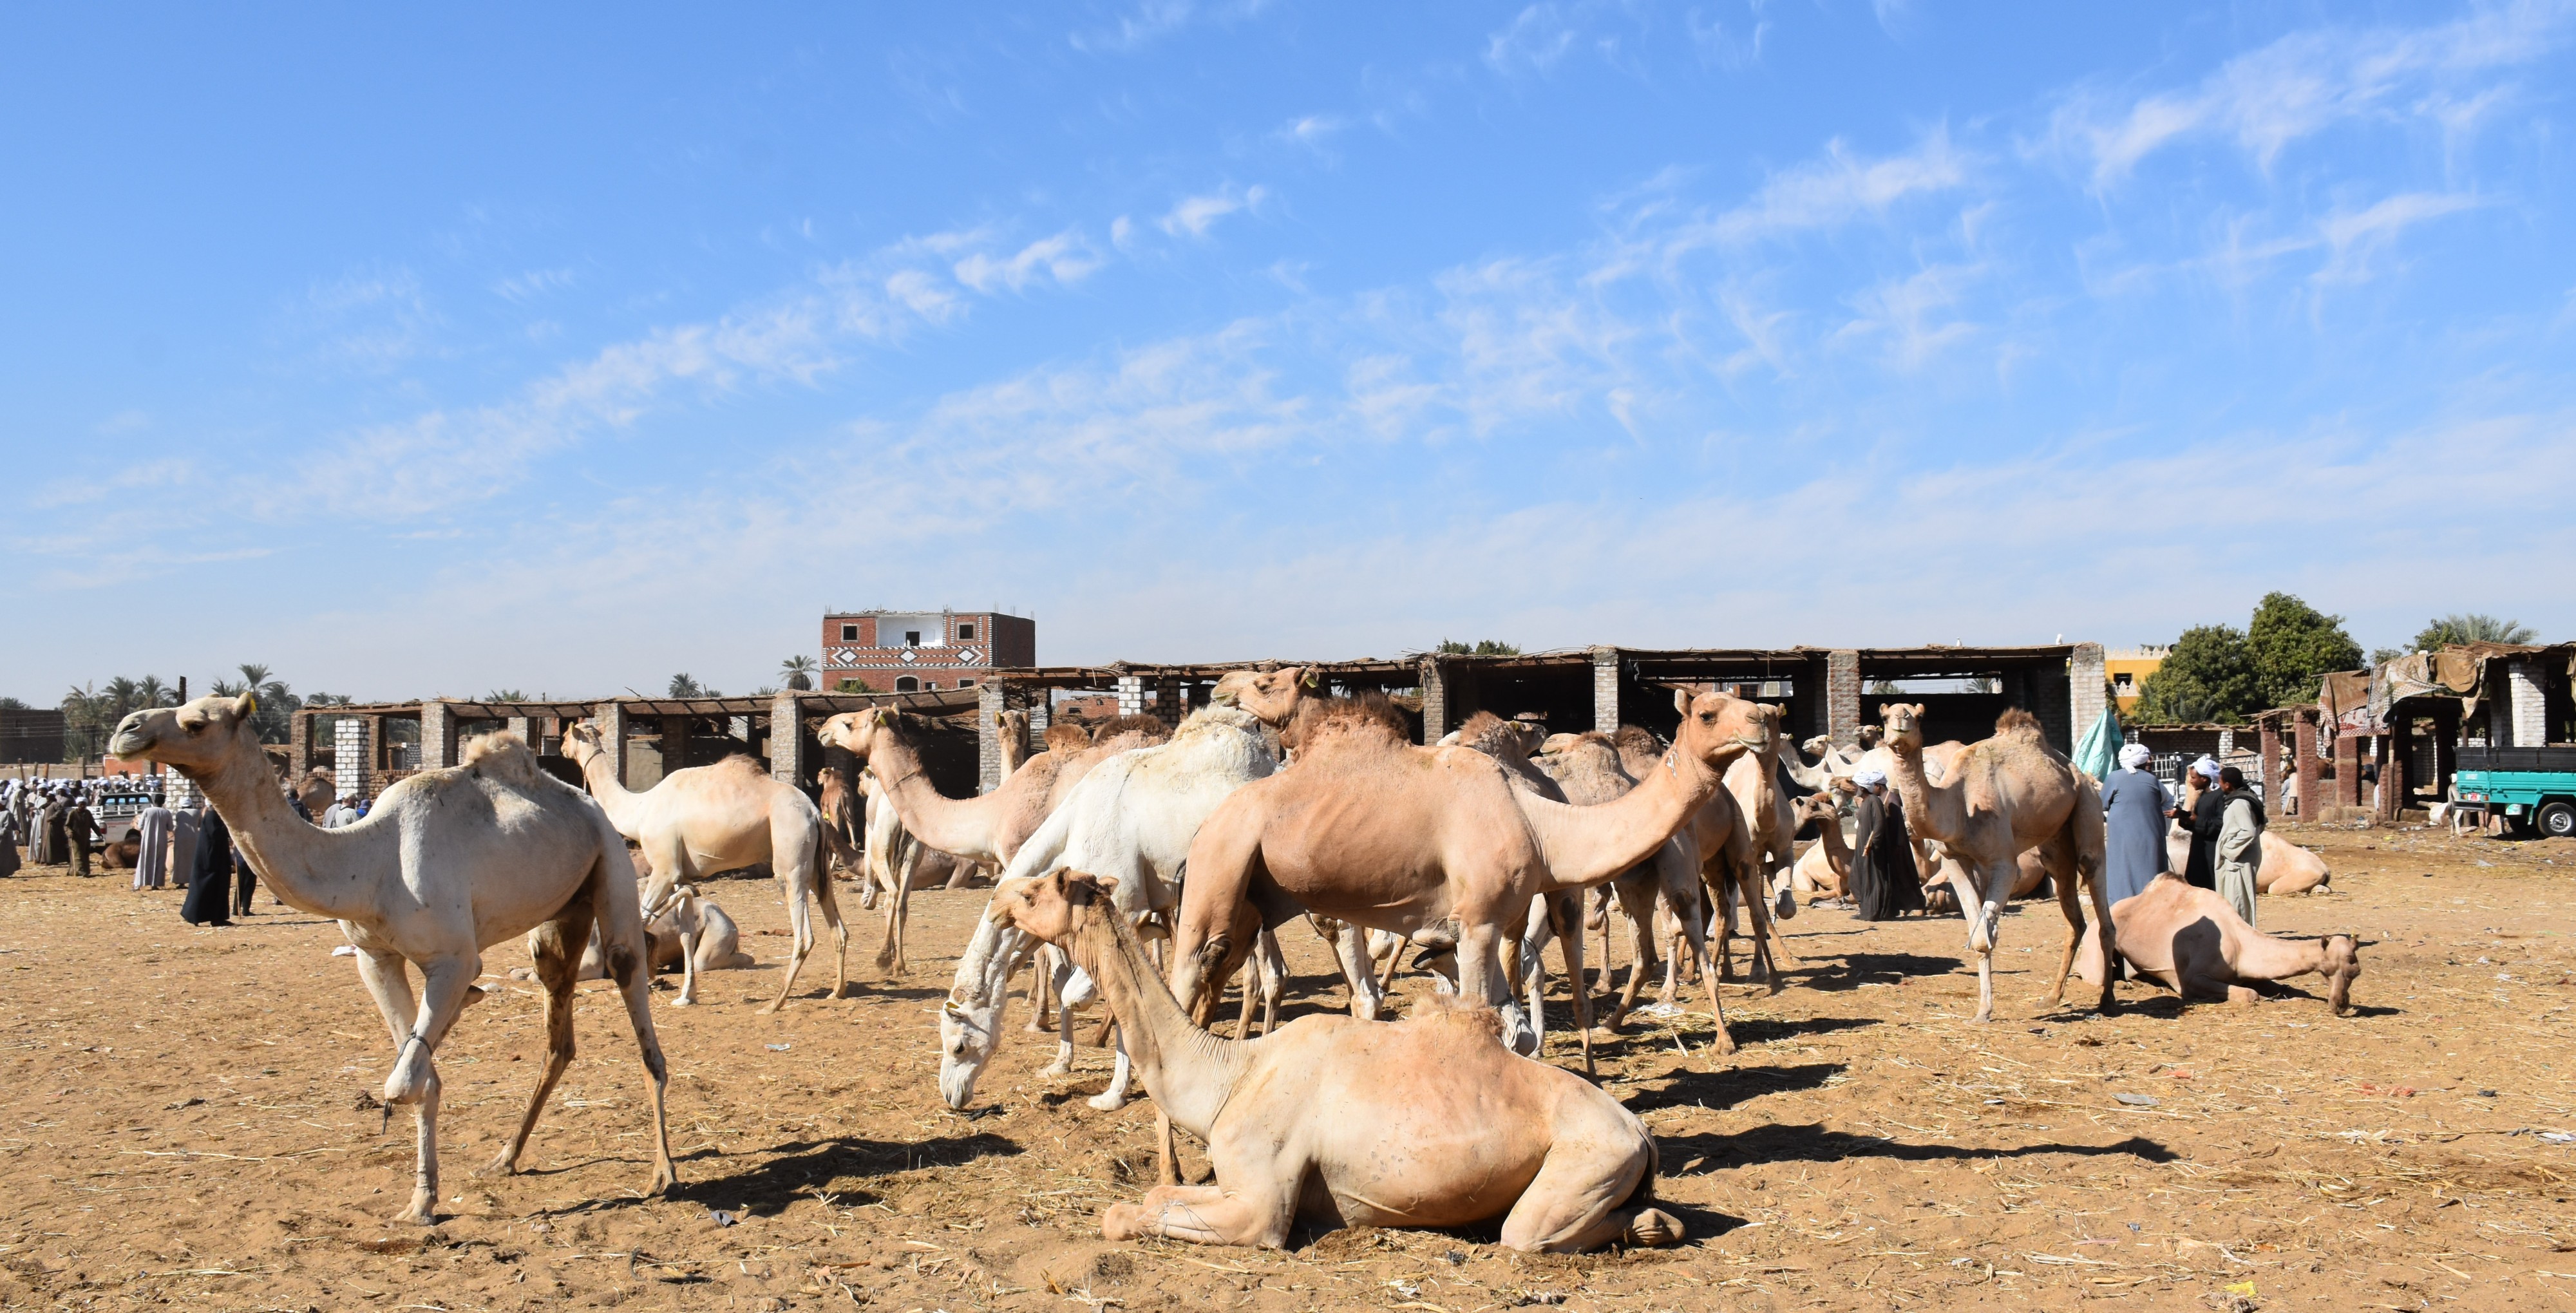 Camel market at Daraw in 2017, photo by Hatem moushir 25